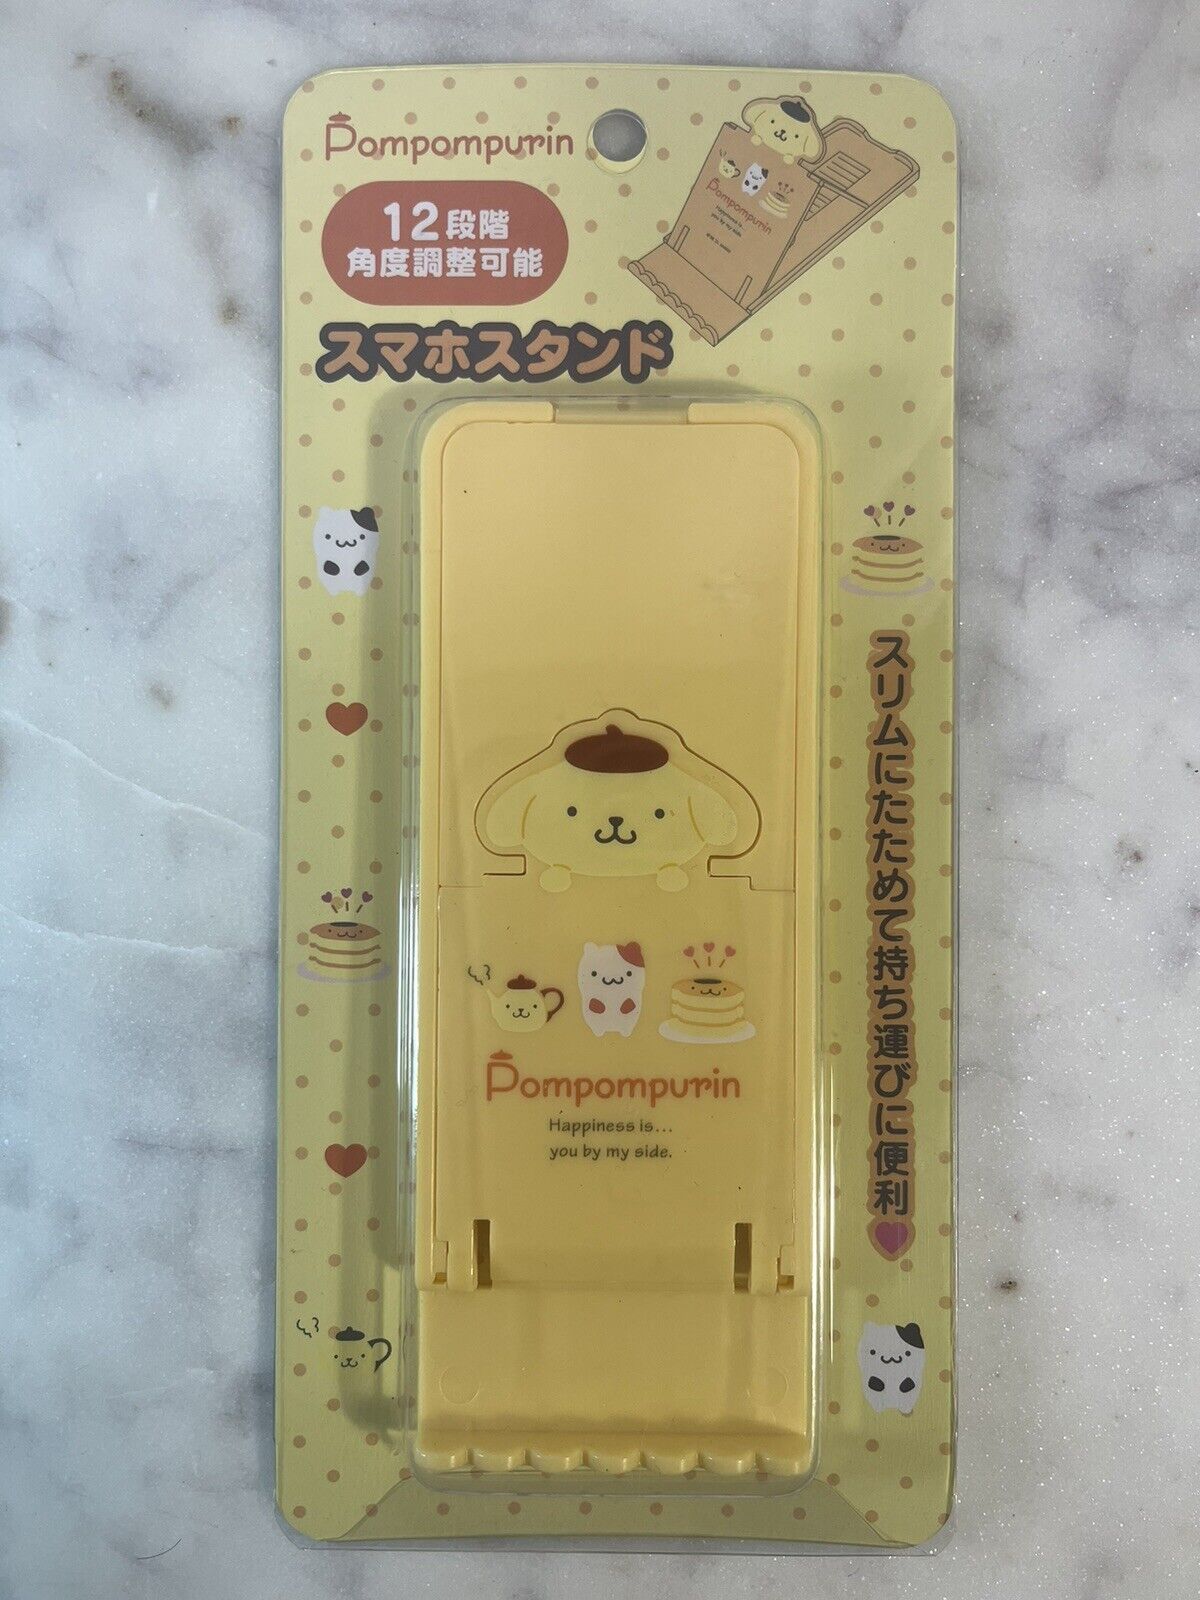 Sanrio Character Pompompurin Folding Smart Phone Stand - yellow